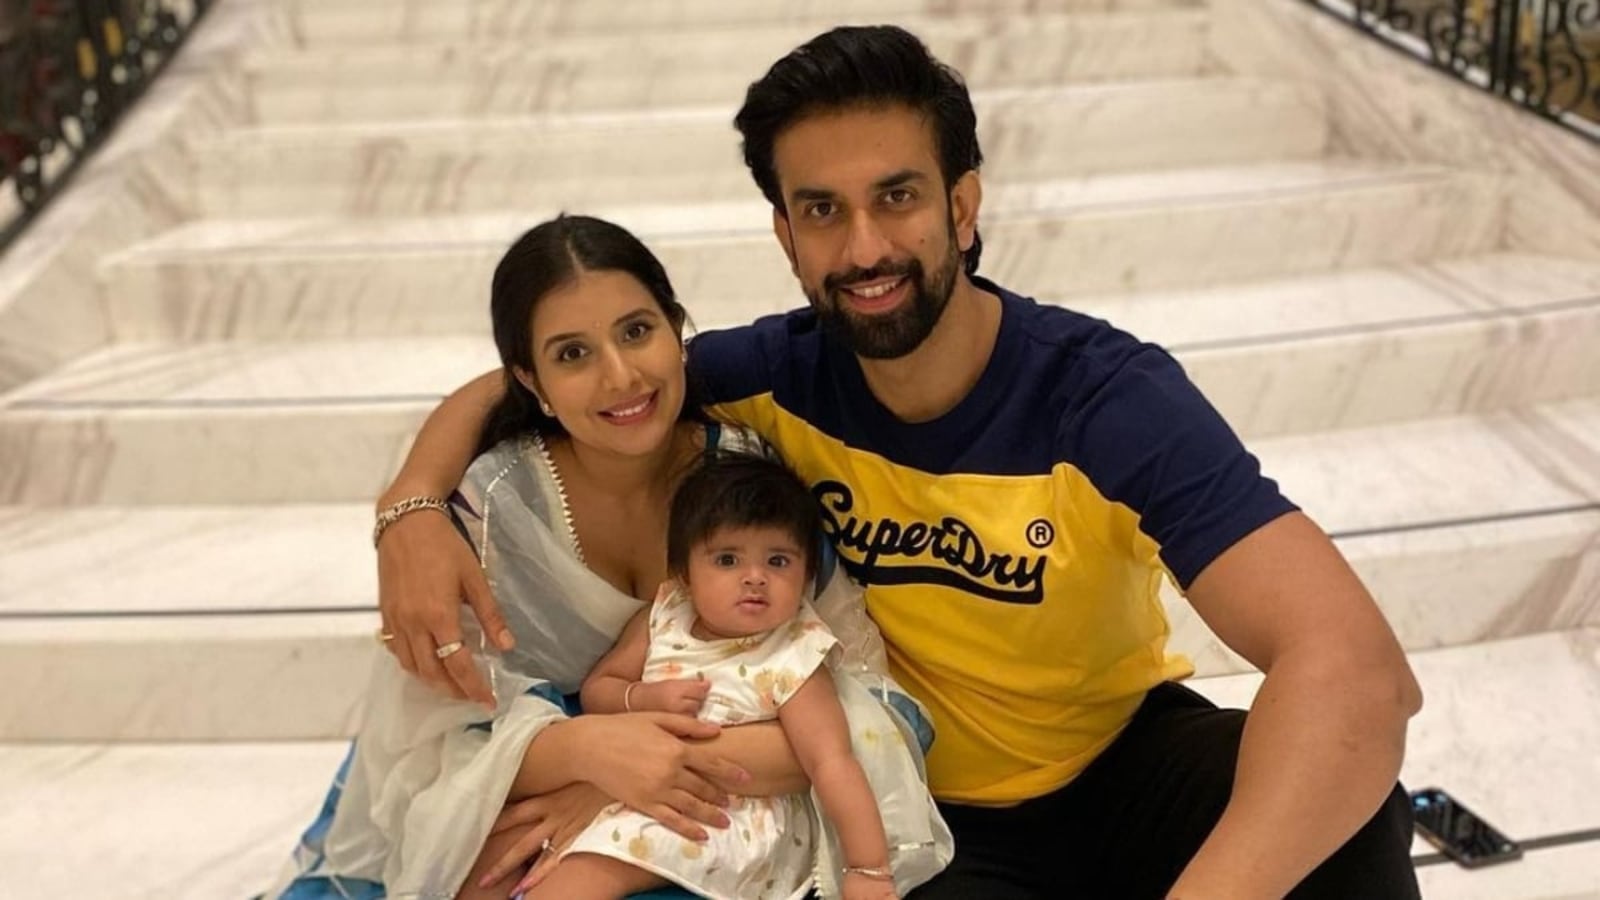 Rajeev Sen praises estranged wife Charu Asopa for taking ‘great care’ of sick daughter: ‘Both have lost weight’